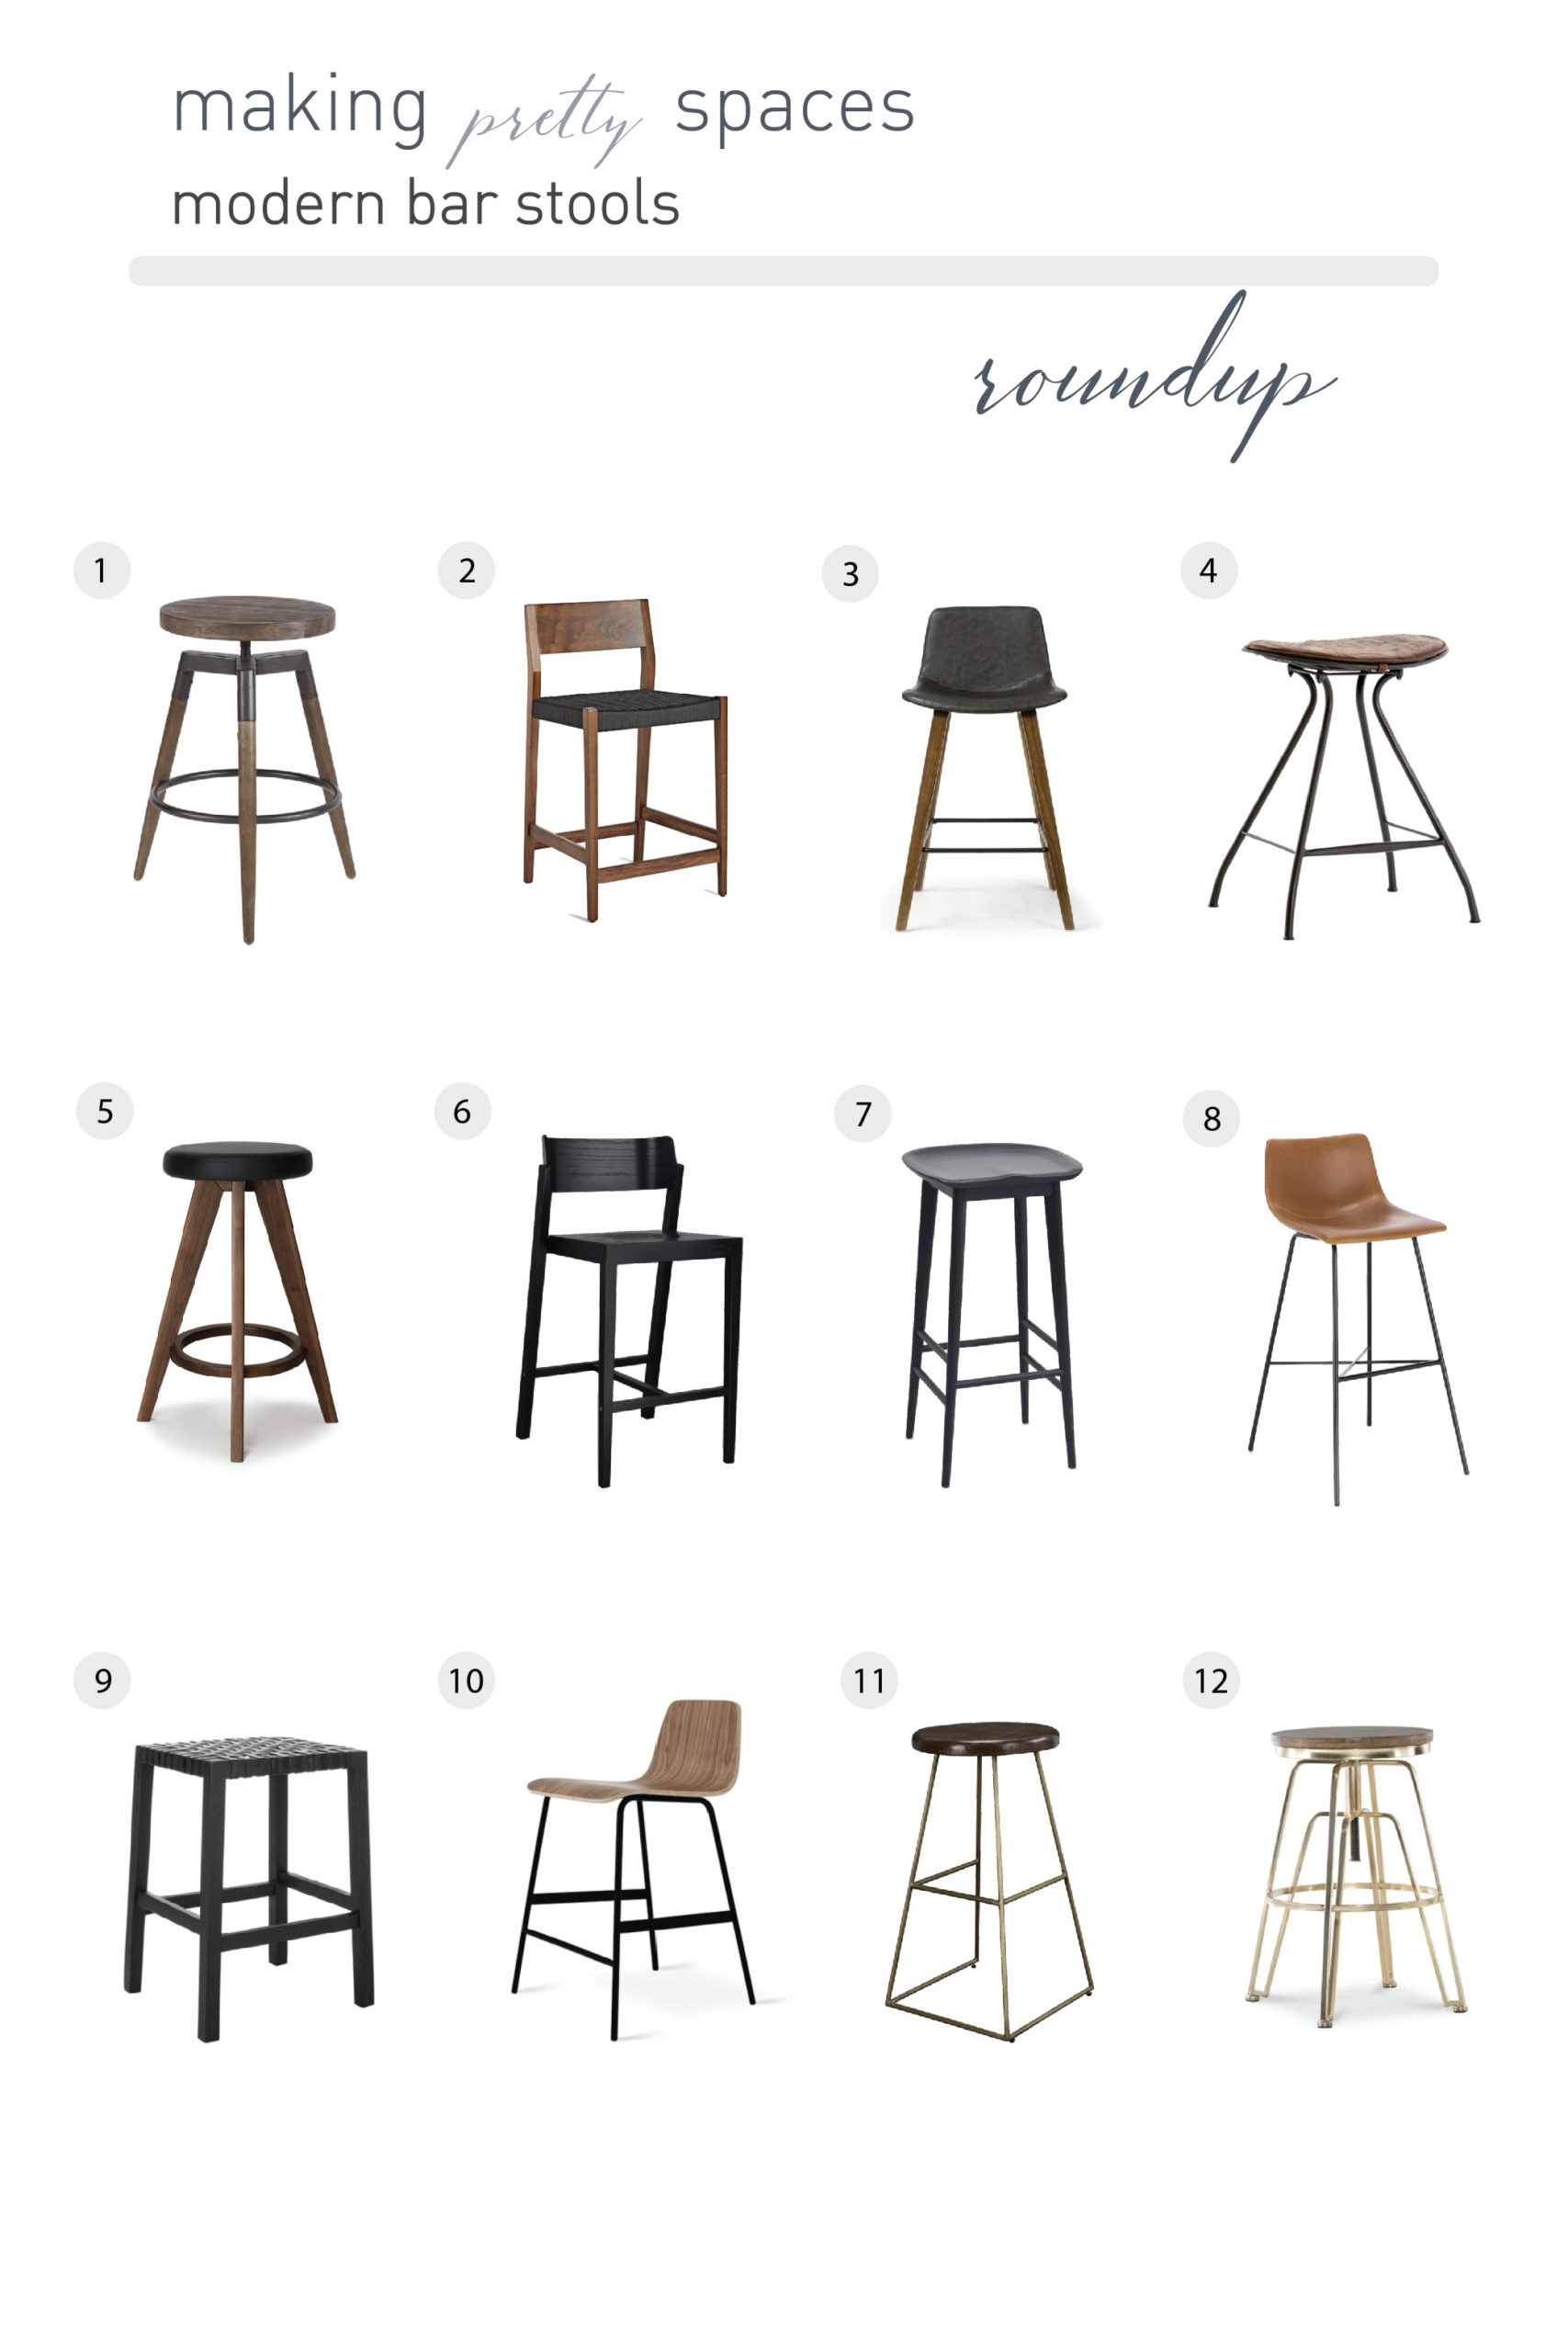 Choose Bar Stools A Modern Roundup, Is There A Way To Make Bar Stools Taller